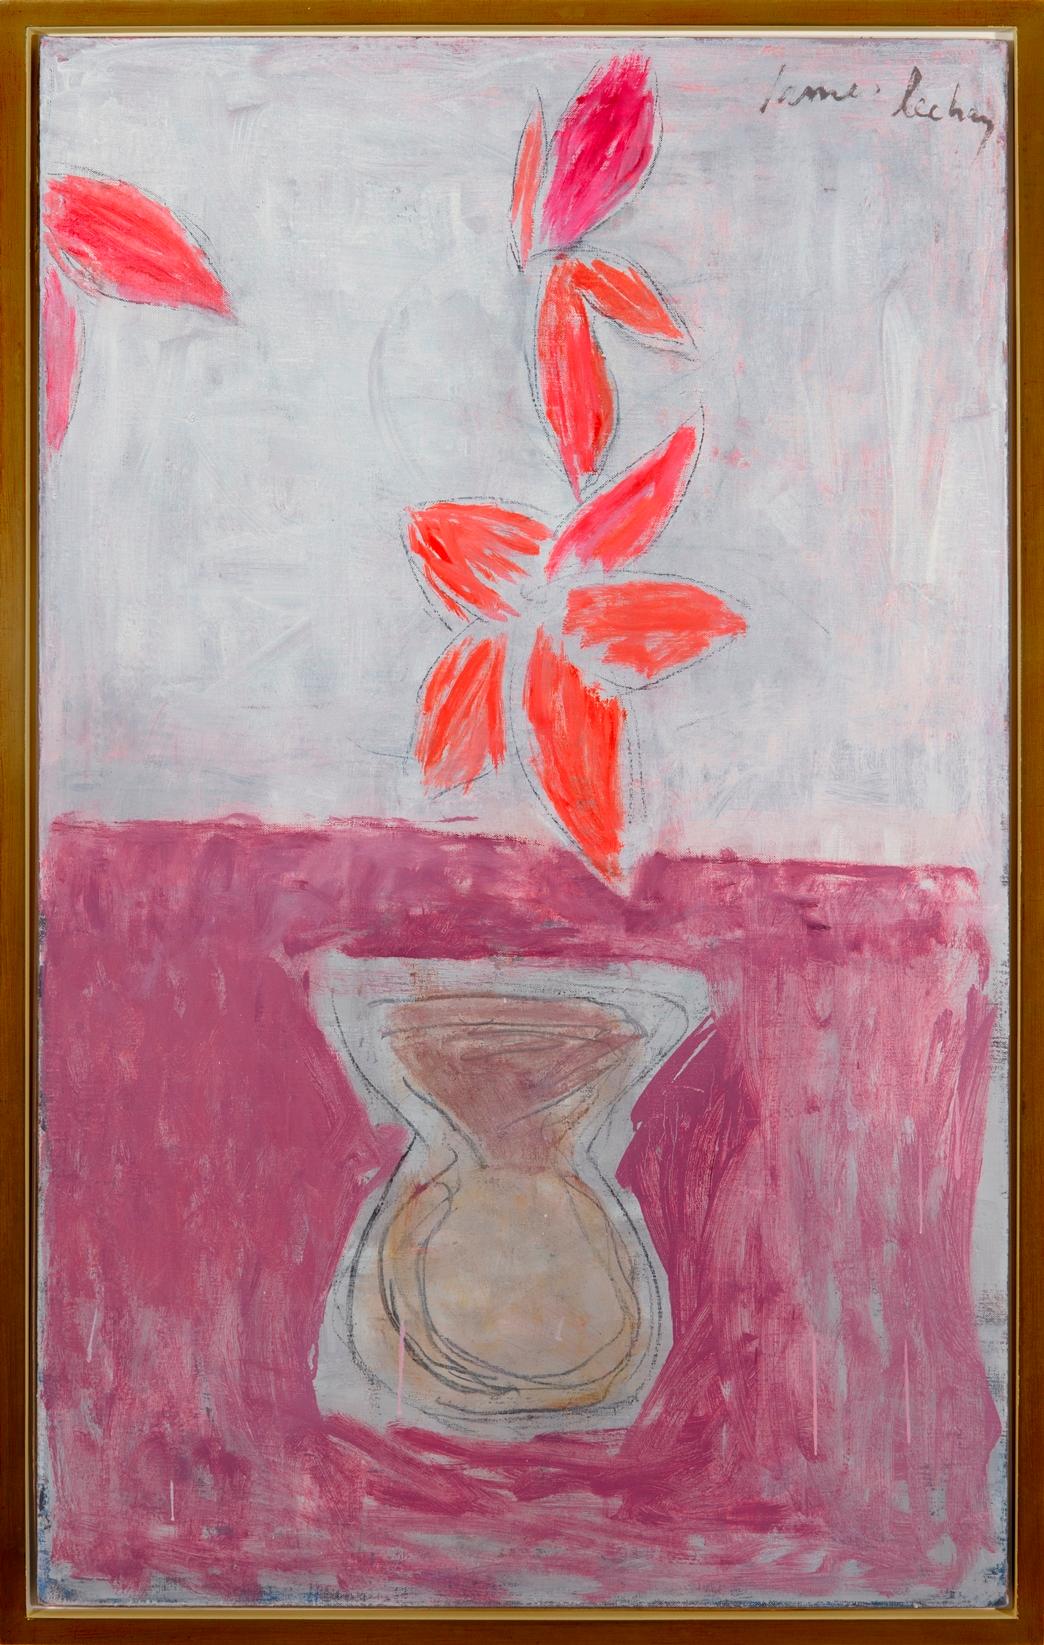 Abstract Painting James Lechay - « Vase rose avec fleurs »